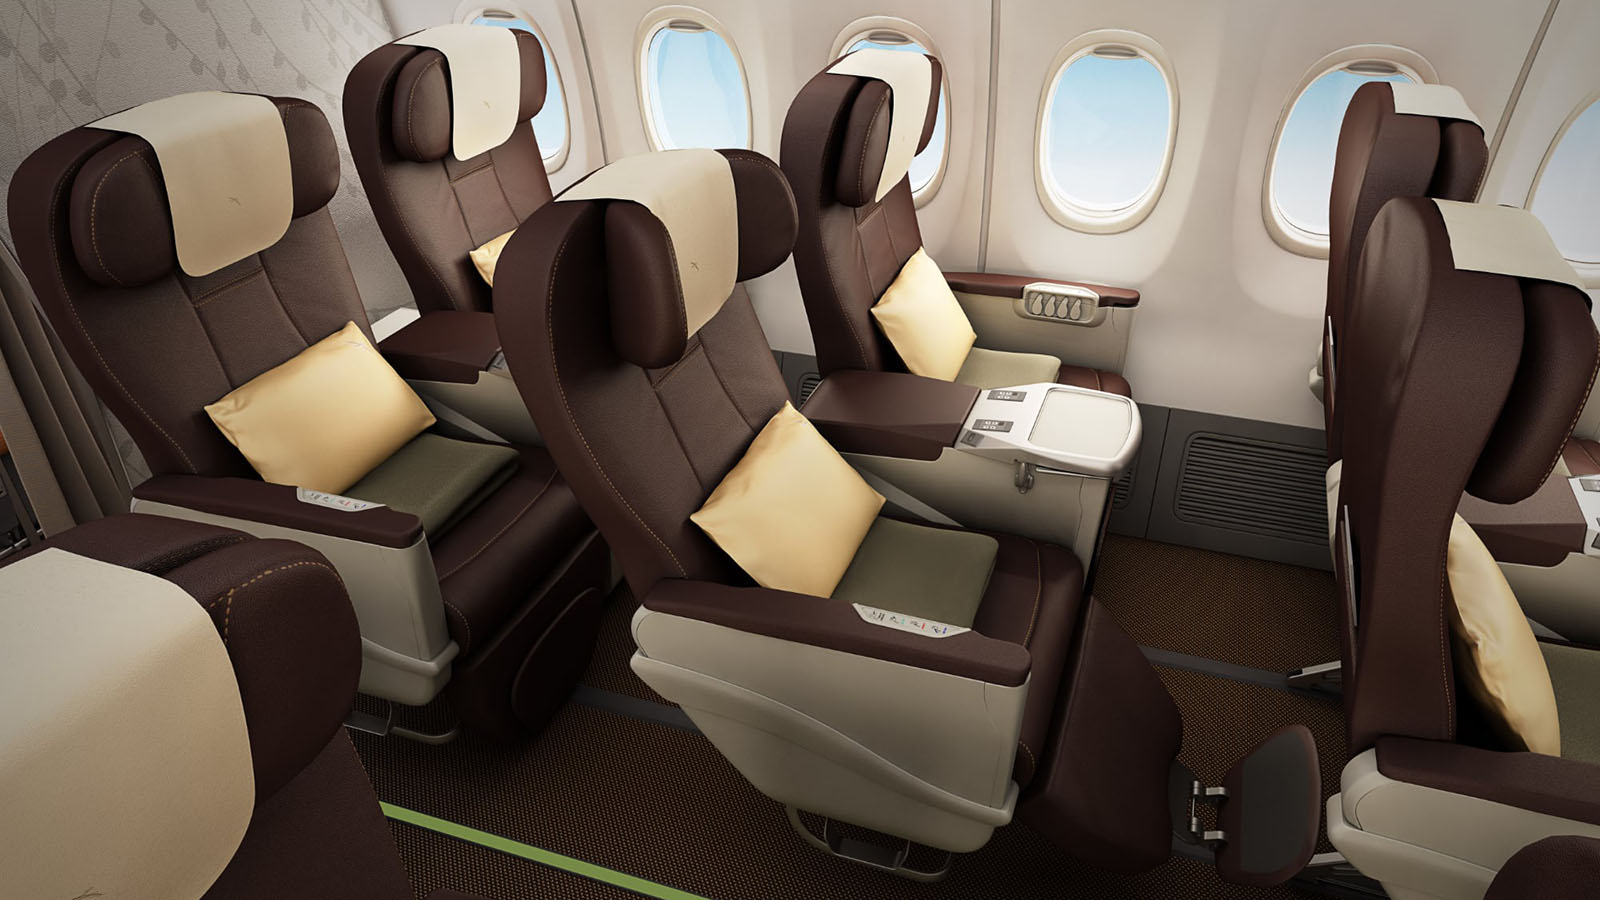 Singapore Airlines' Boeing 737-800 Business Class